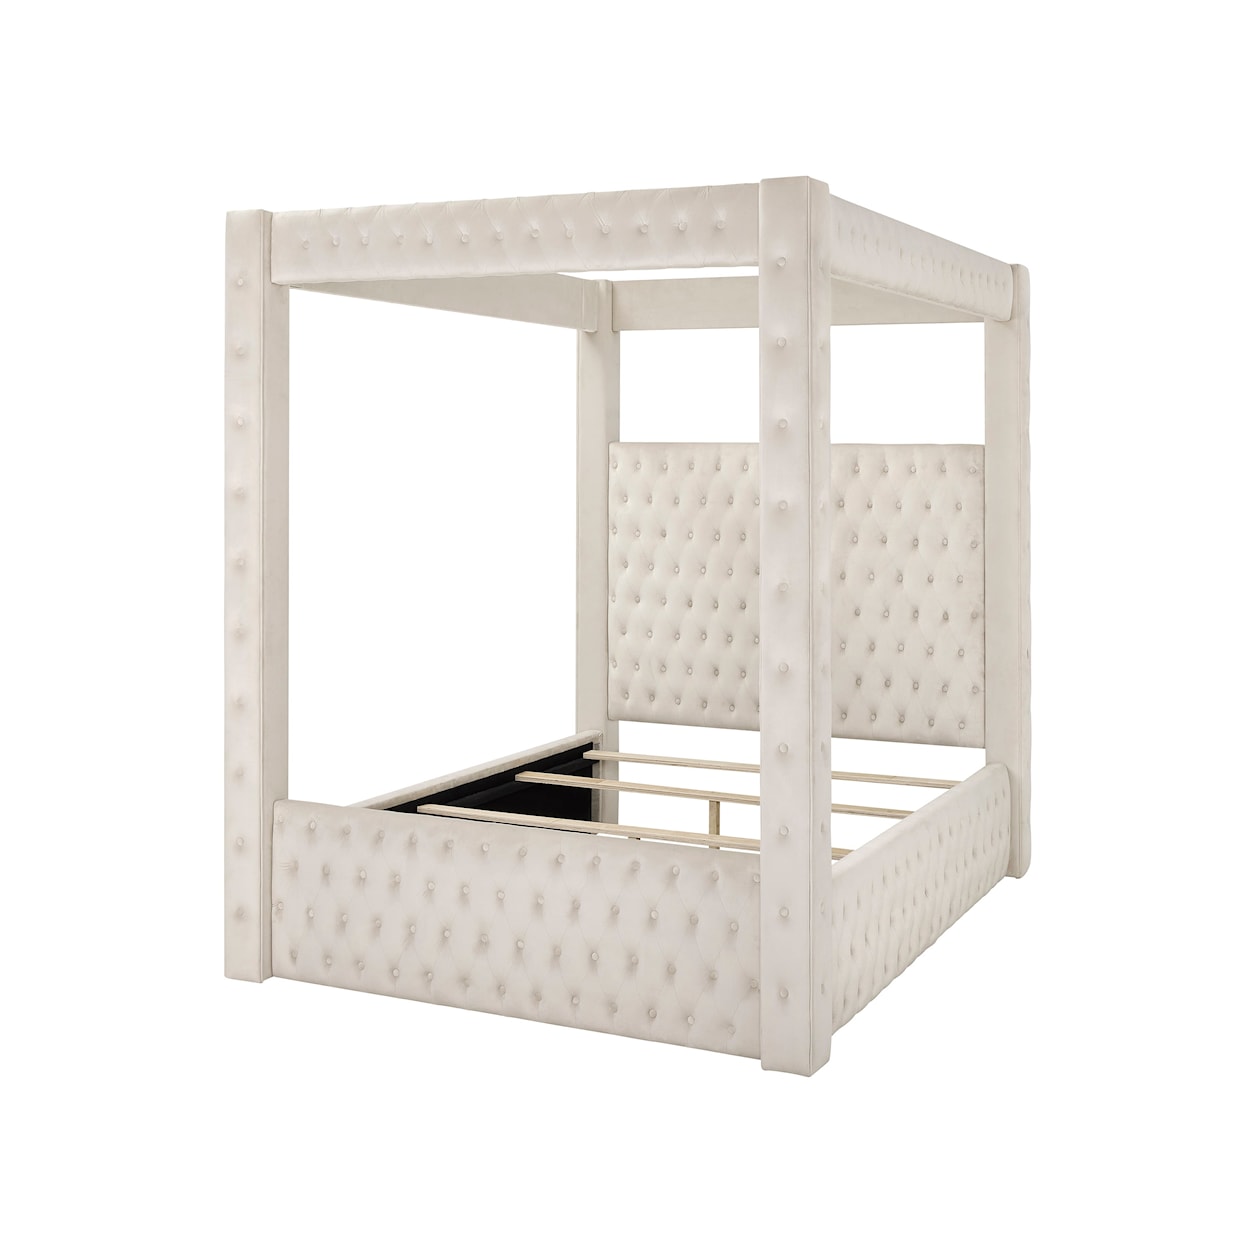 Crown Mark ANNABELLE Queen Canopy Bed - Ivory